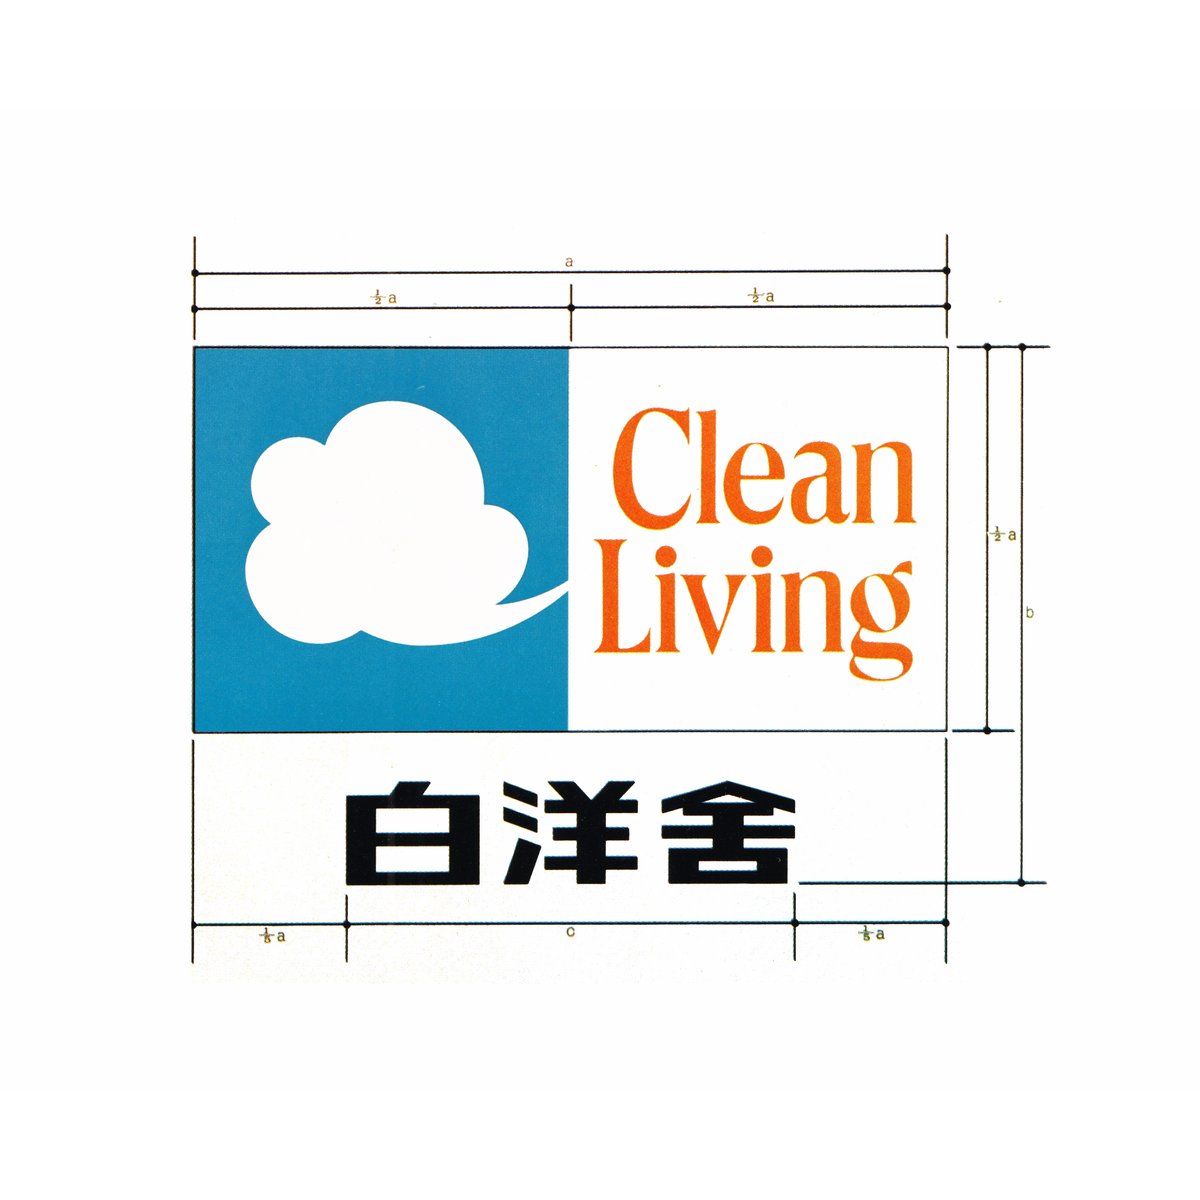 Clean Living by Takashi Umino, Mark Studio & Sozo, Japan, 1972, Dry Cleaning.

Discover more Japanese logos at logo-archive.org

#logos #branding #logodesign #designhistory #graphicdesign